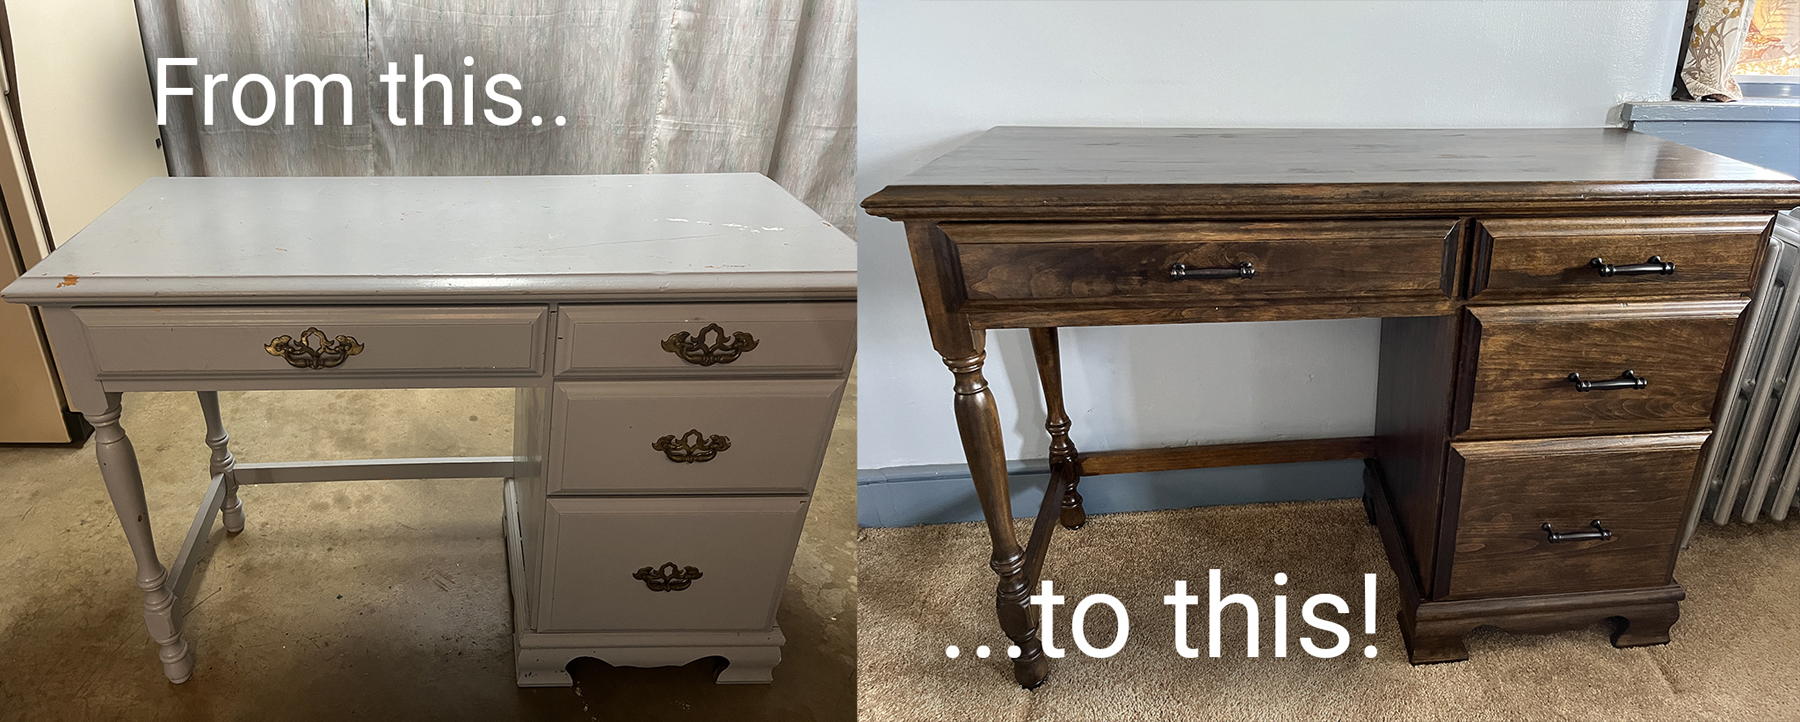 Shows before and after desk restoration project